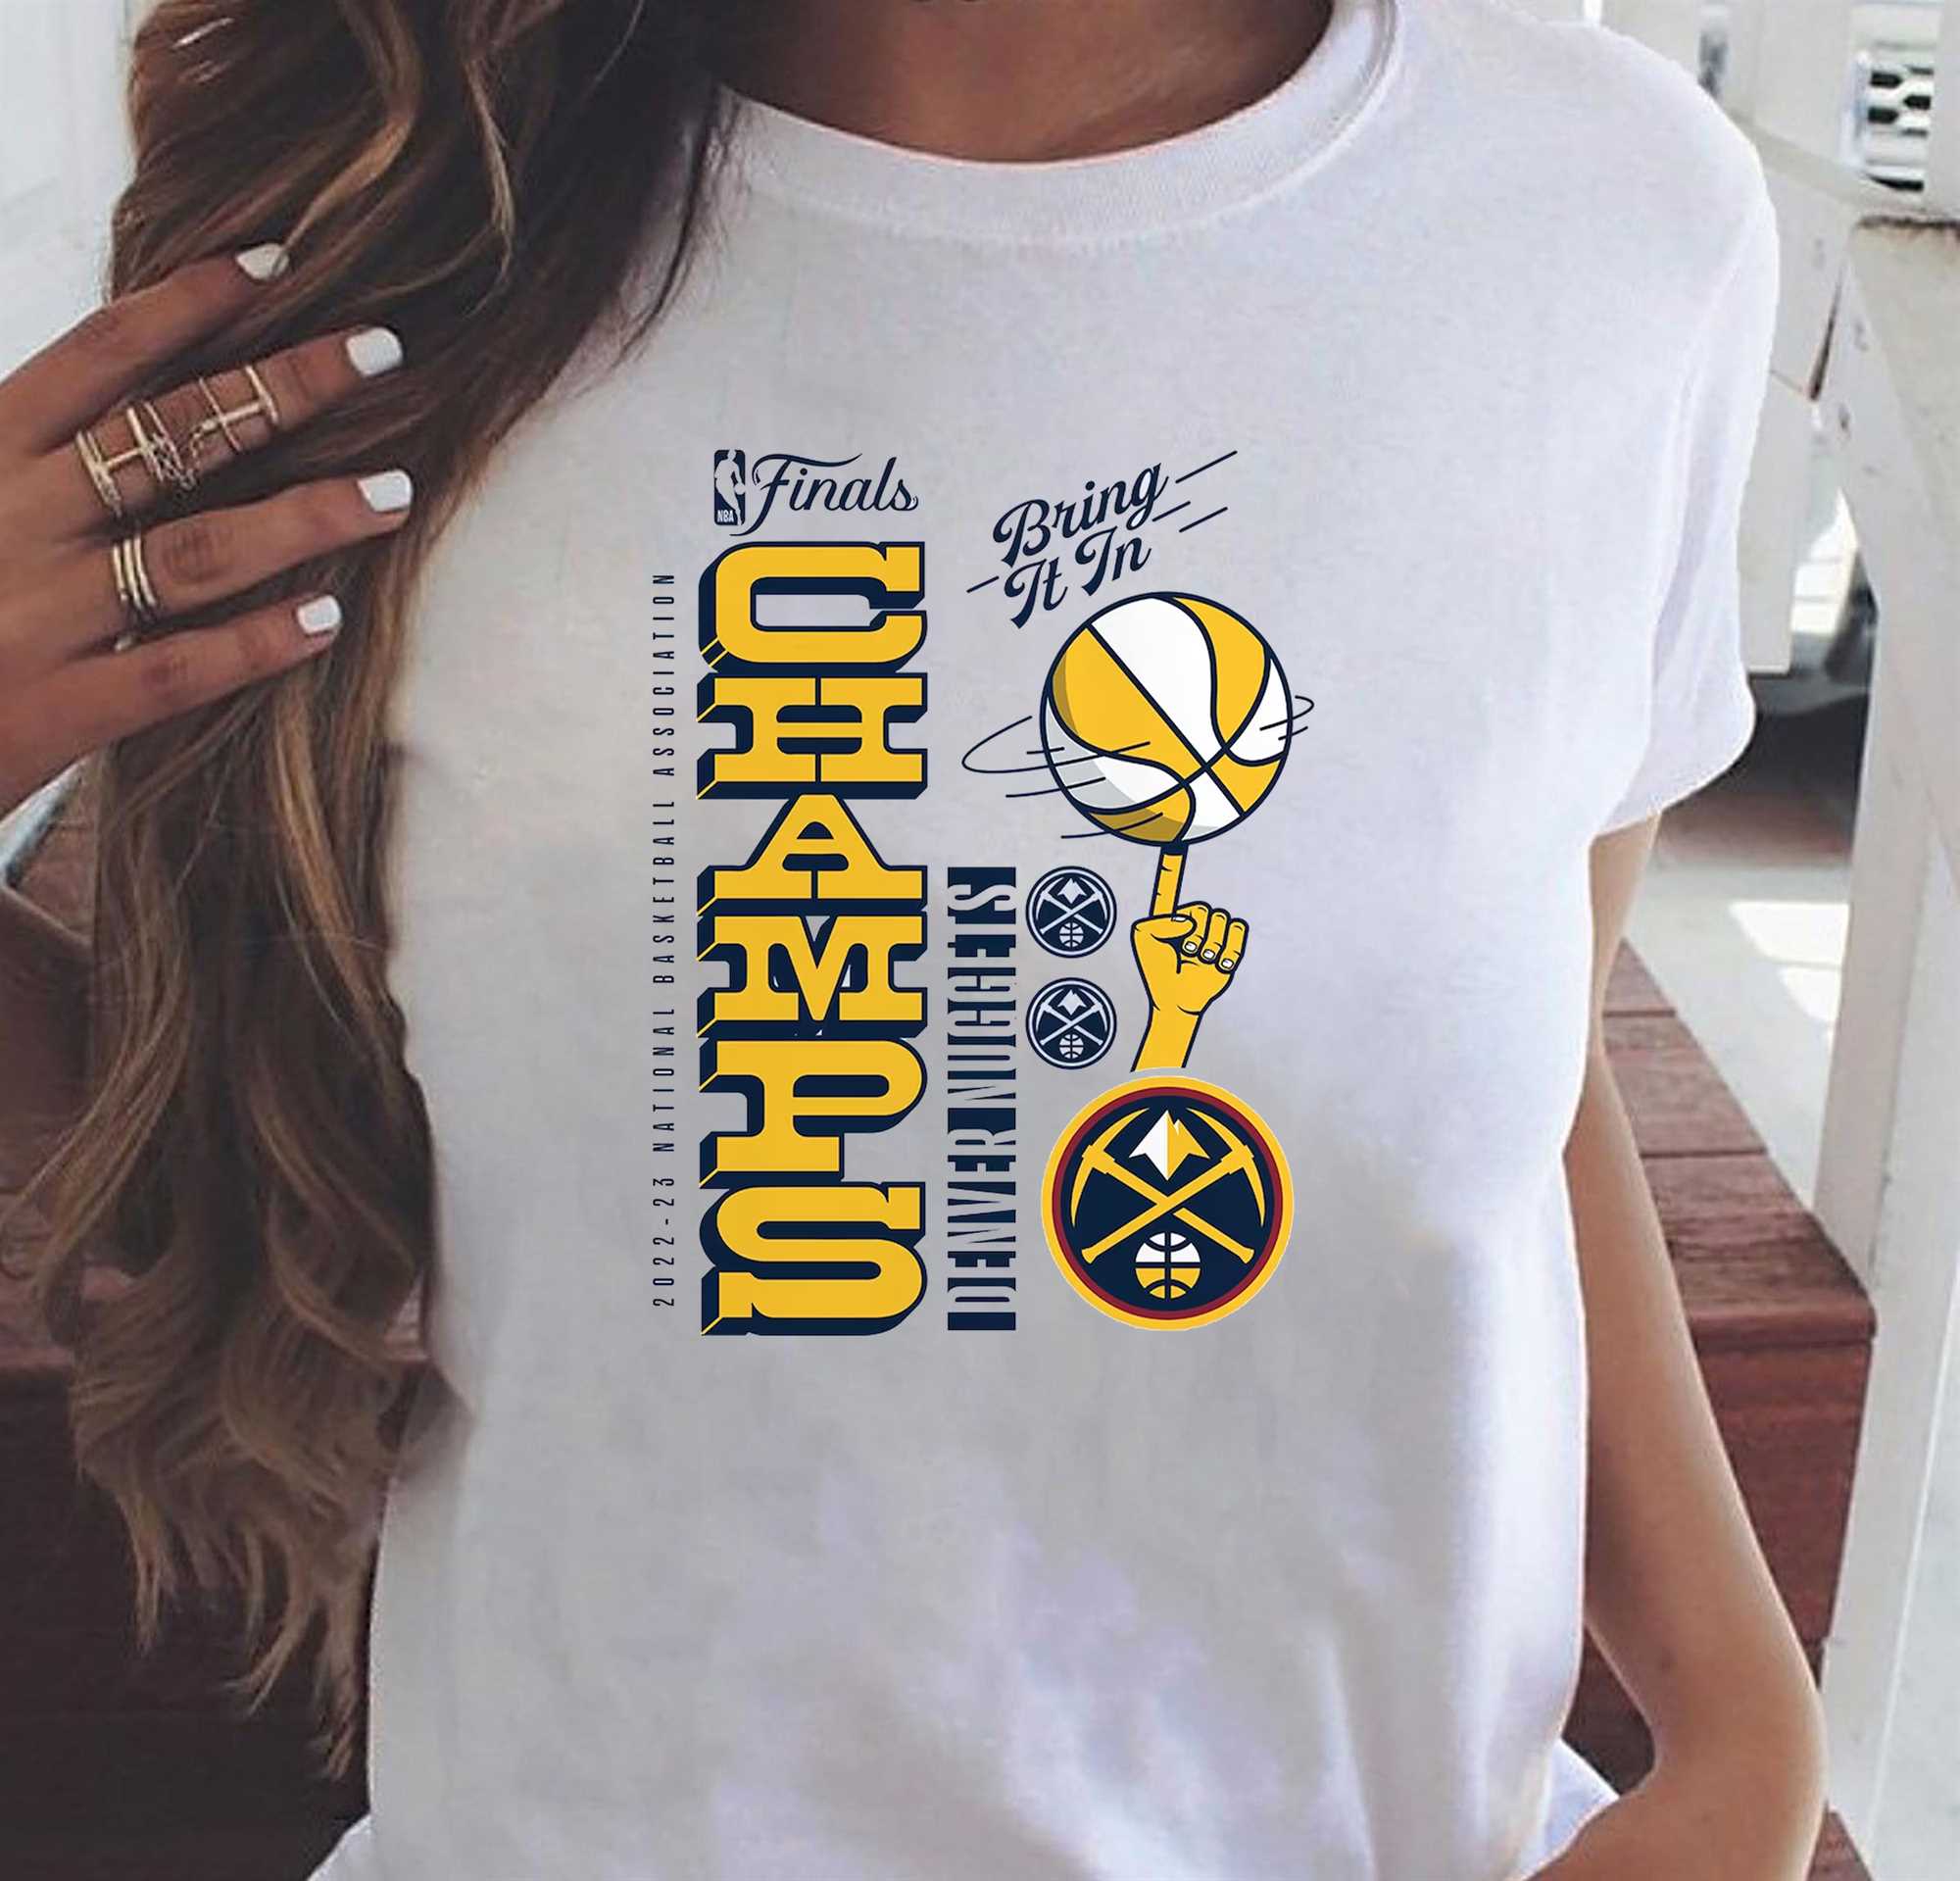 The Denver Nuggets Are The 2022-23 NBA Champions Vintage T-Shirt - T-shirts  Low Price